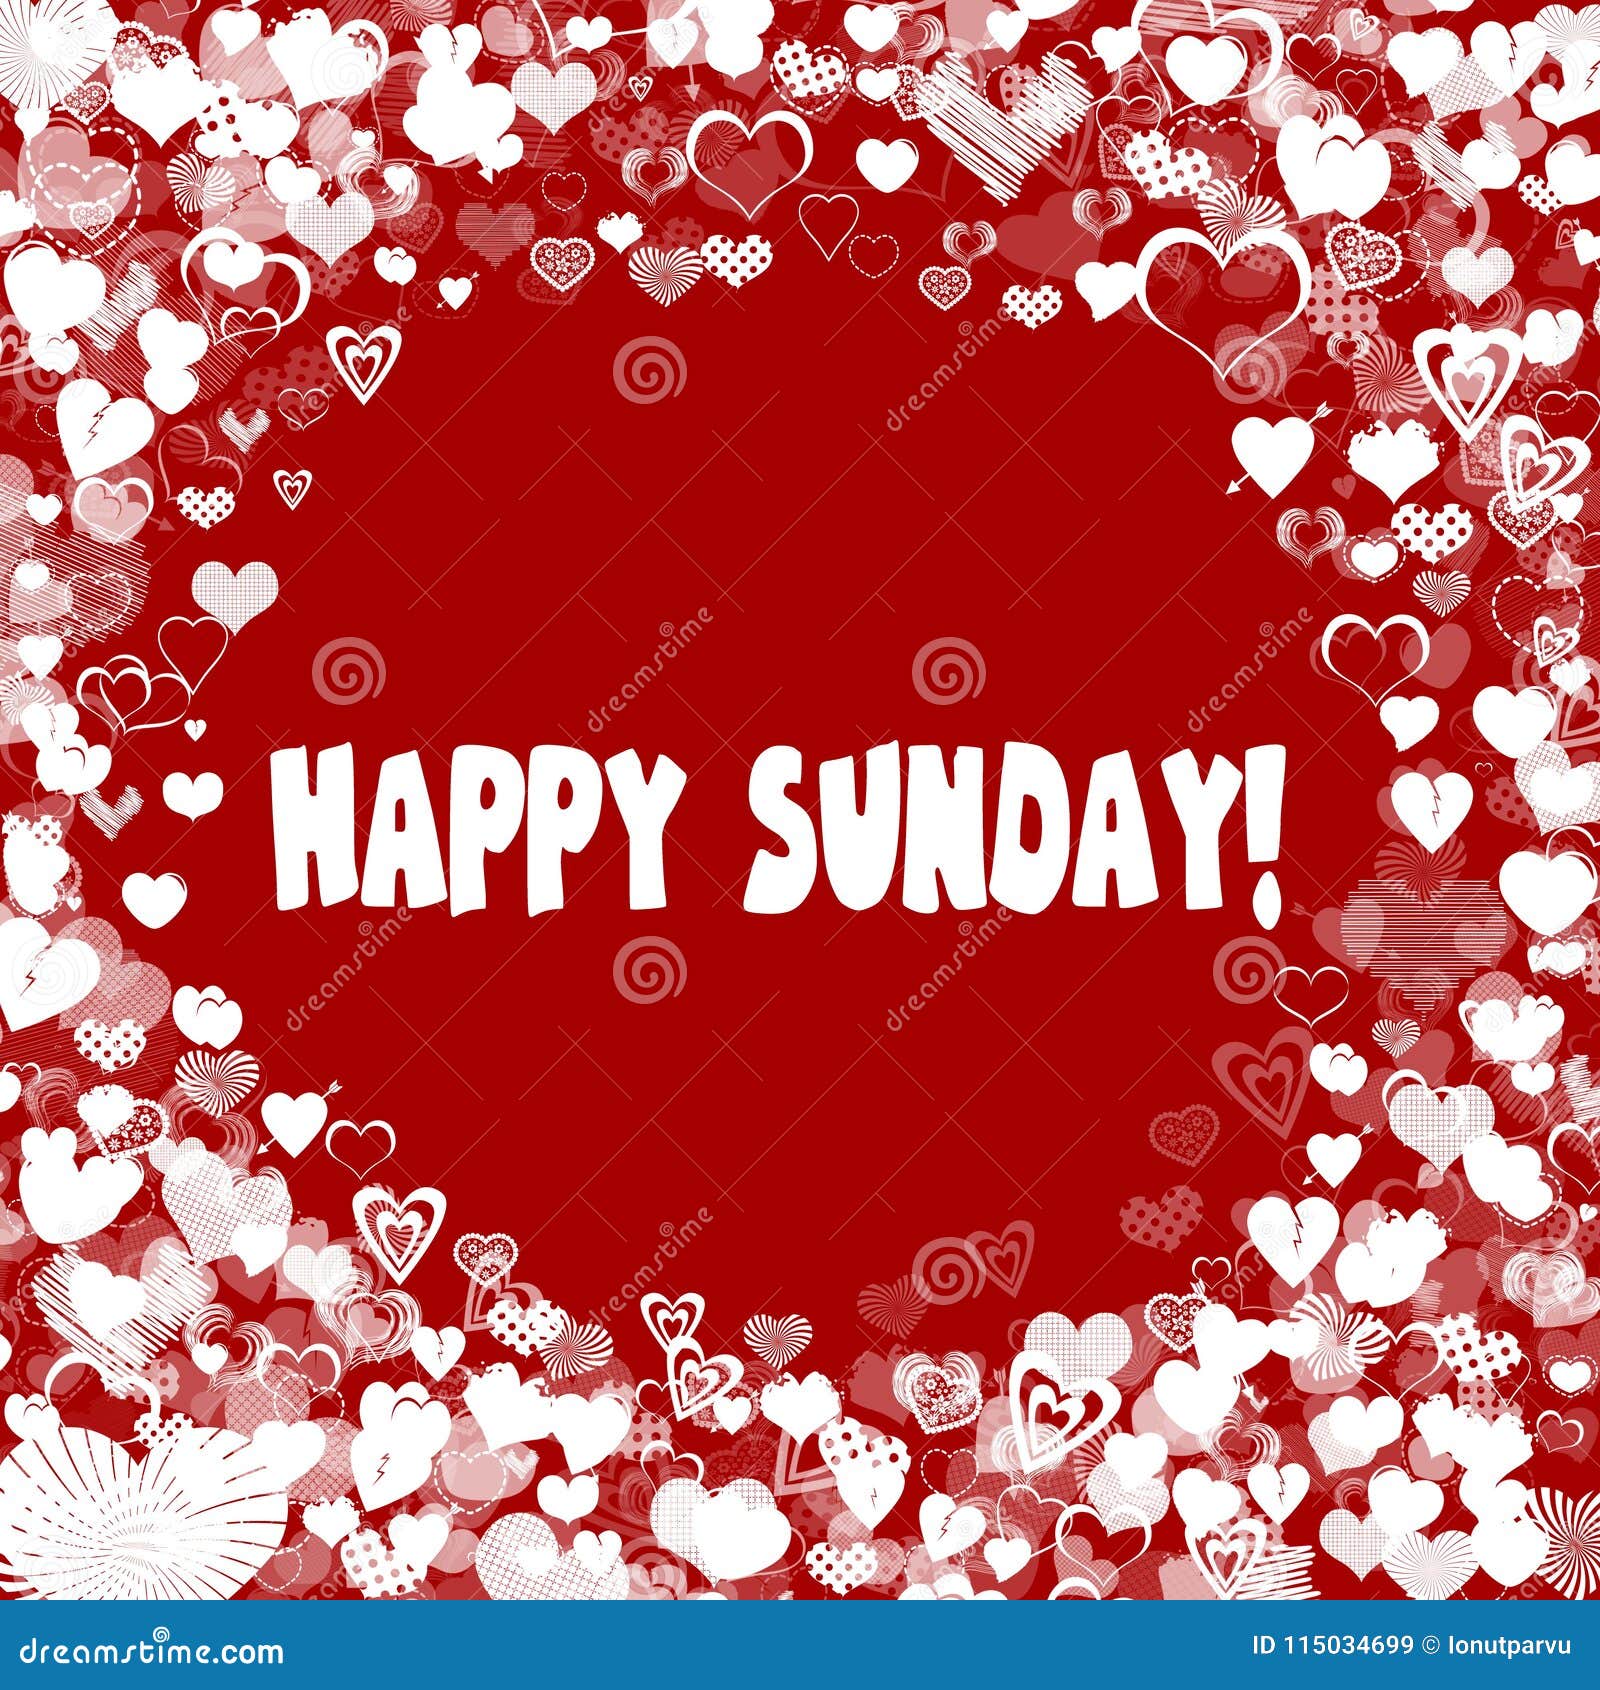 Hearts Frame with HAPPY SUNDAY Text on Red Background. Stock ...